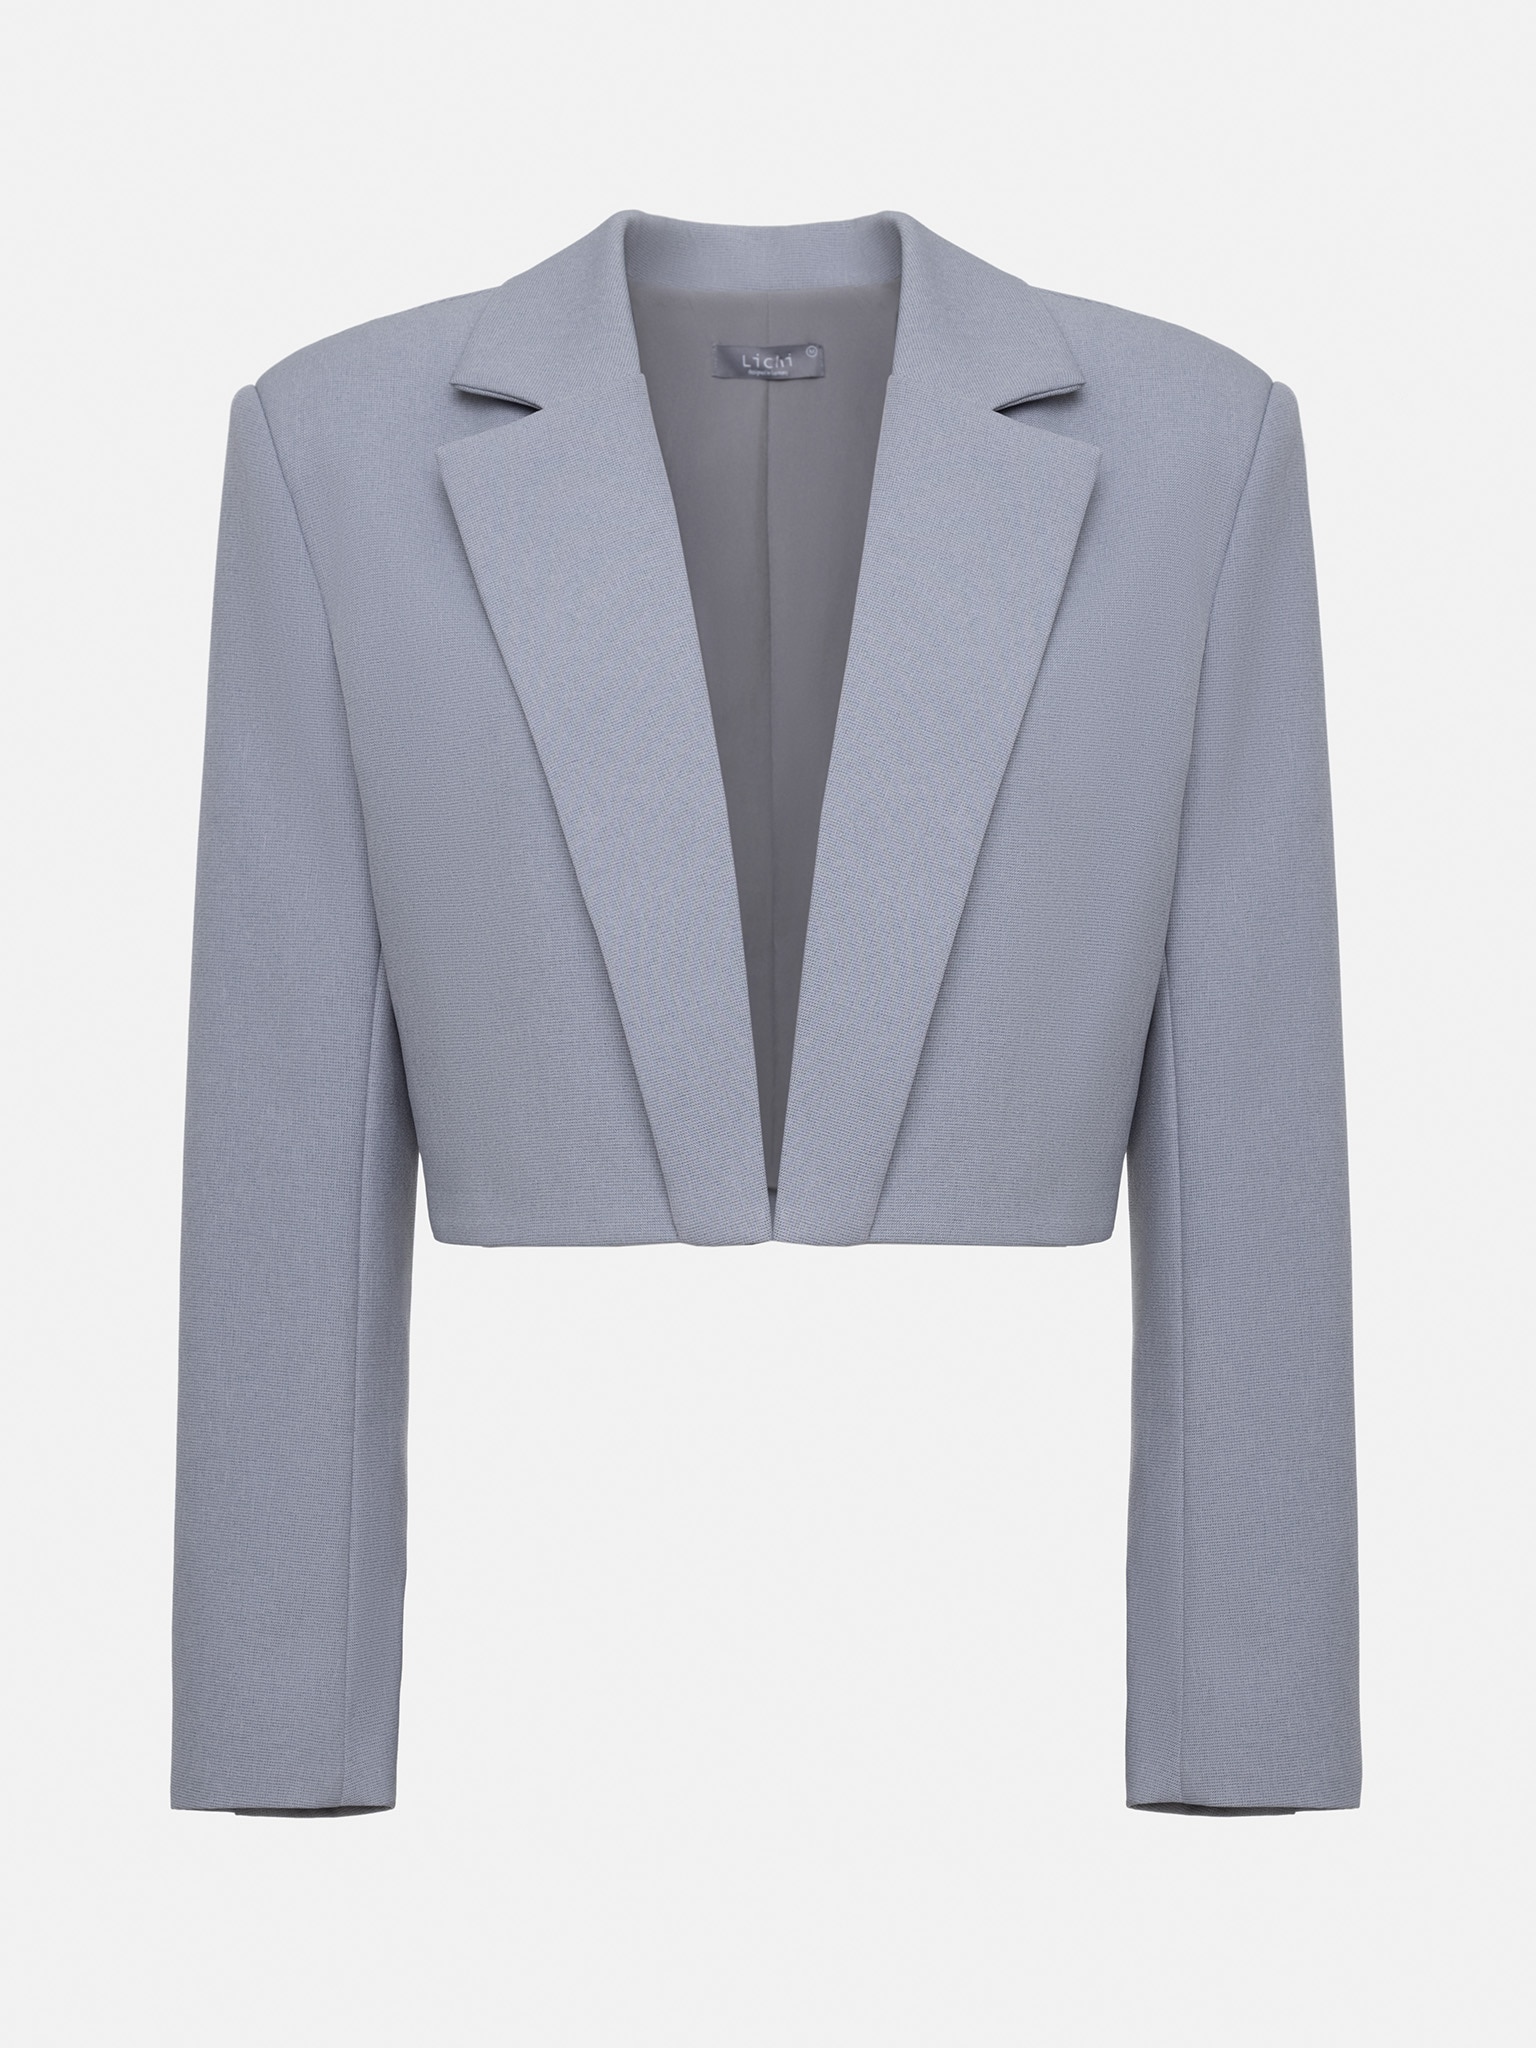 Cropped suit-inspired blazer